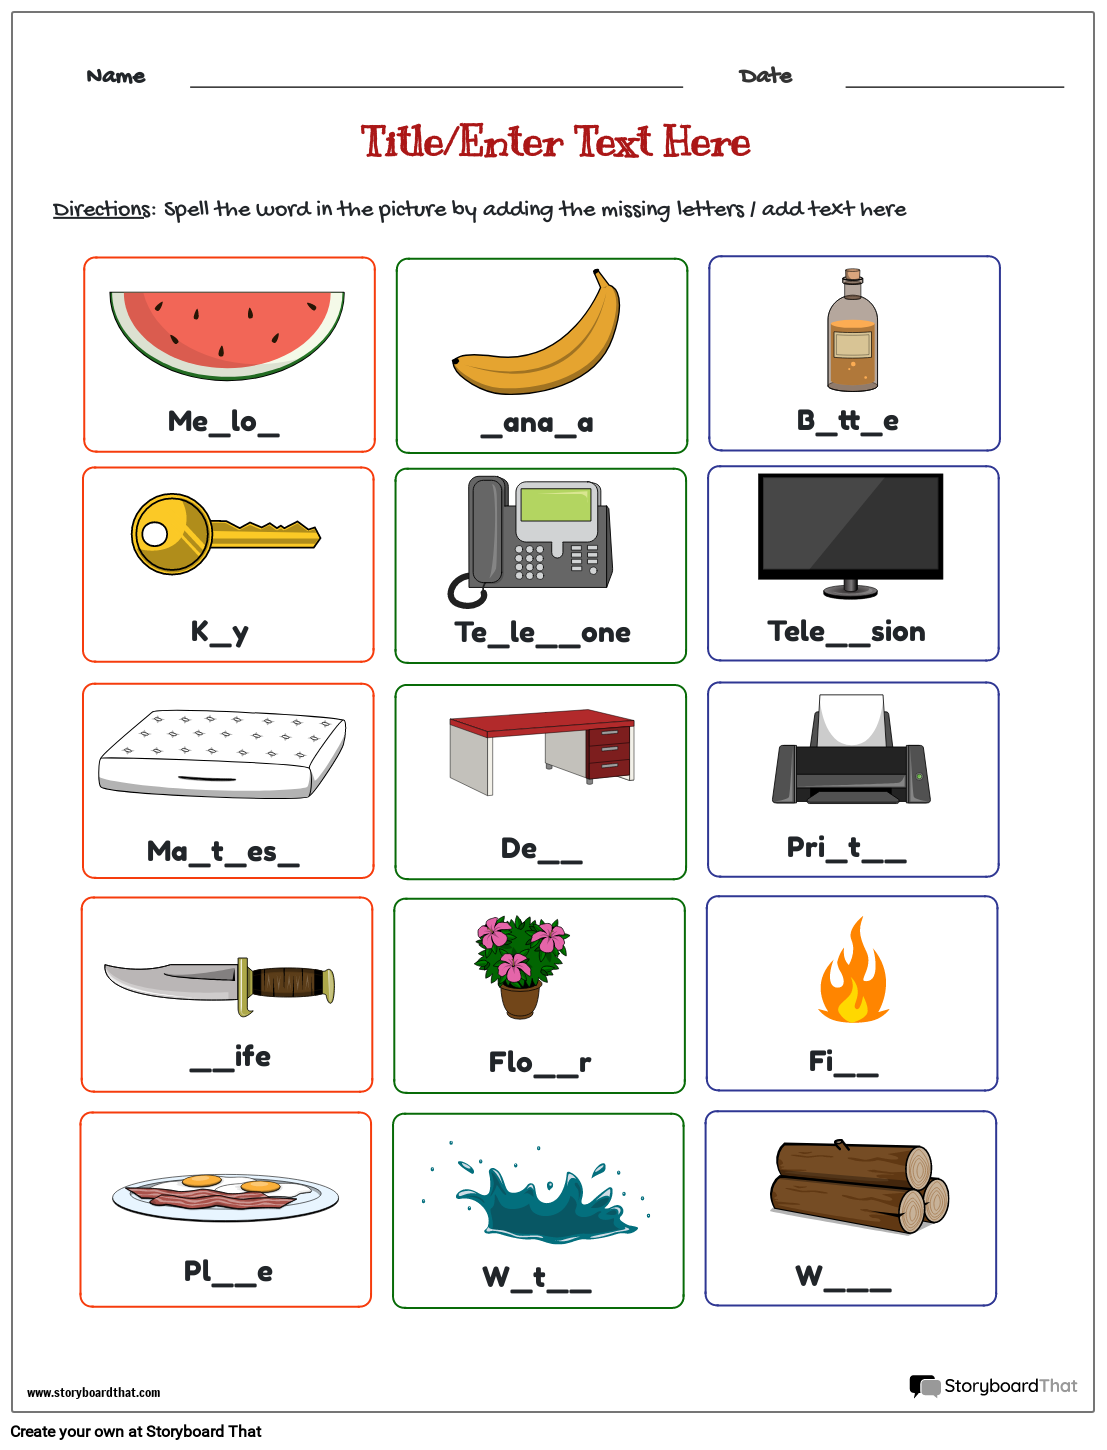 Spelling Vocabulary template